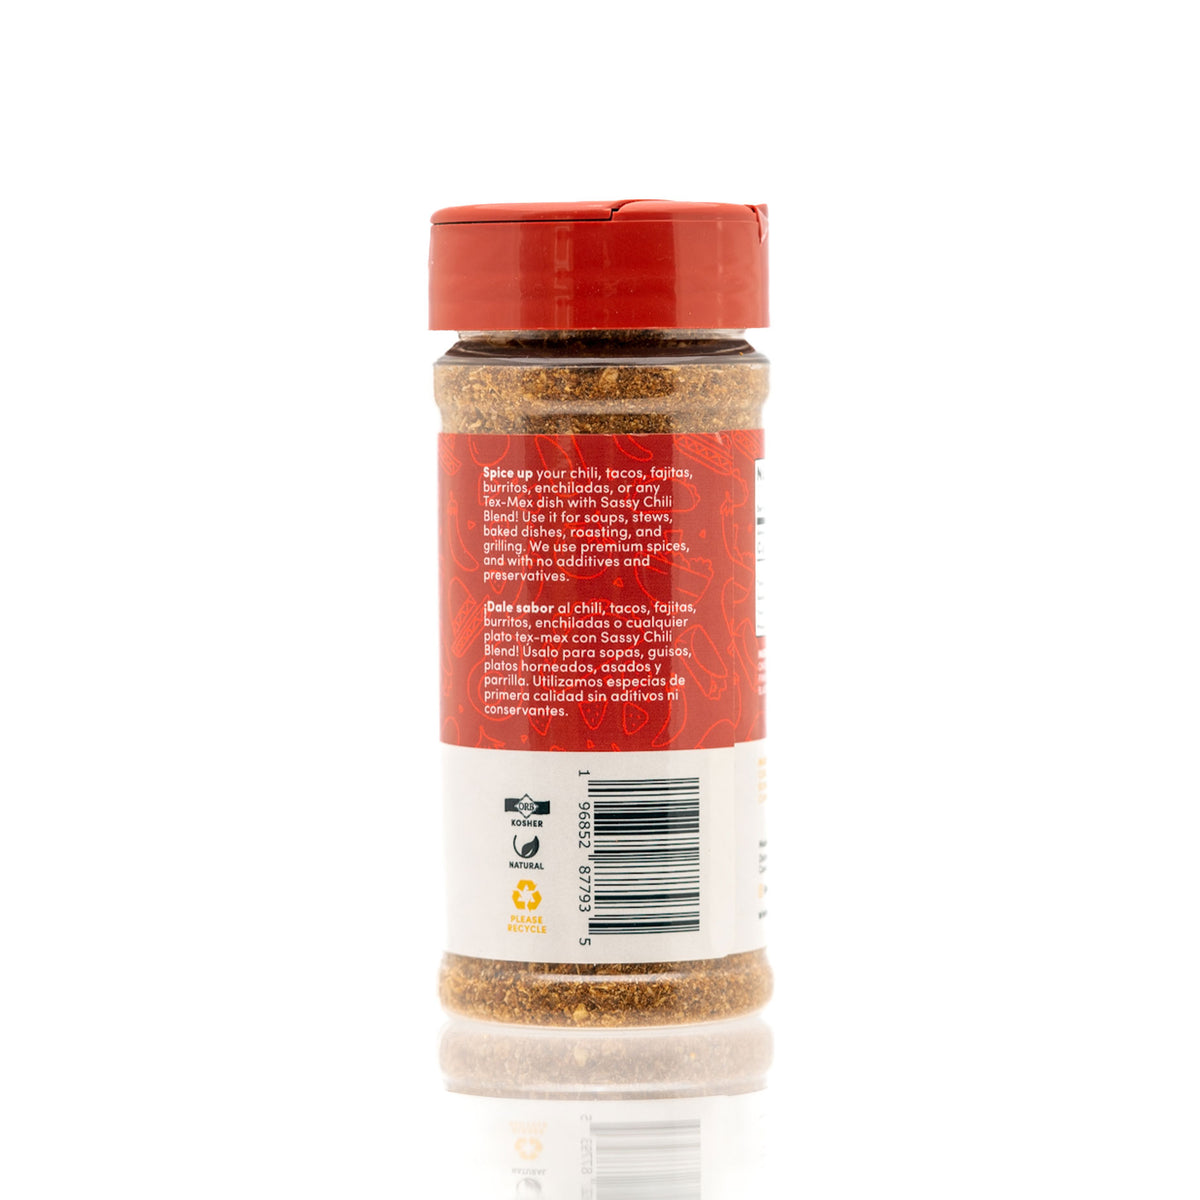 Fashion Frontier Spice it Up!, Spicy Seasoning Salt, spice it up